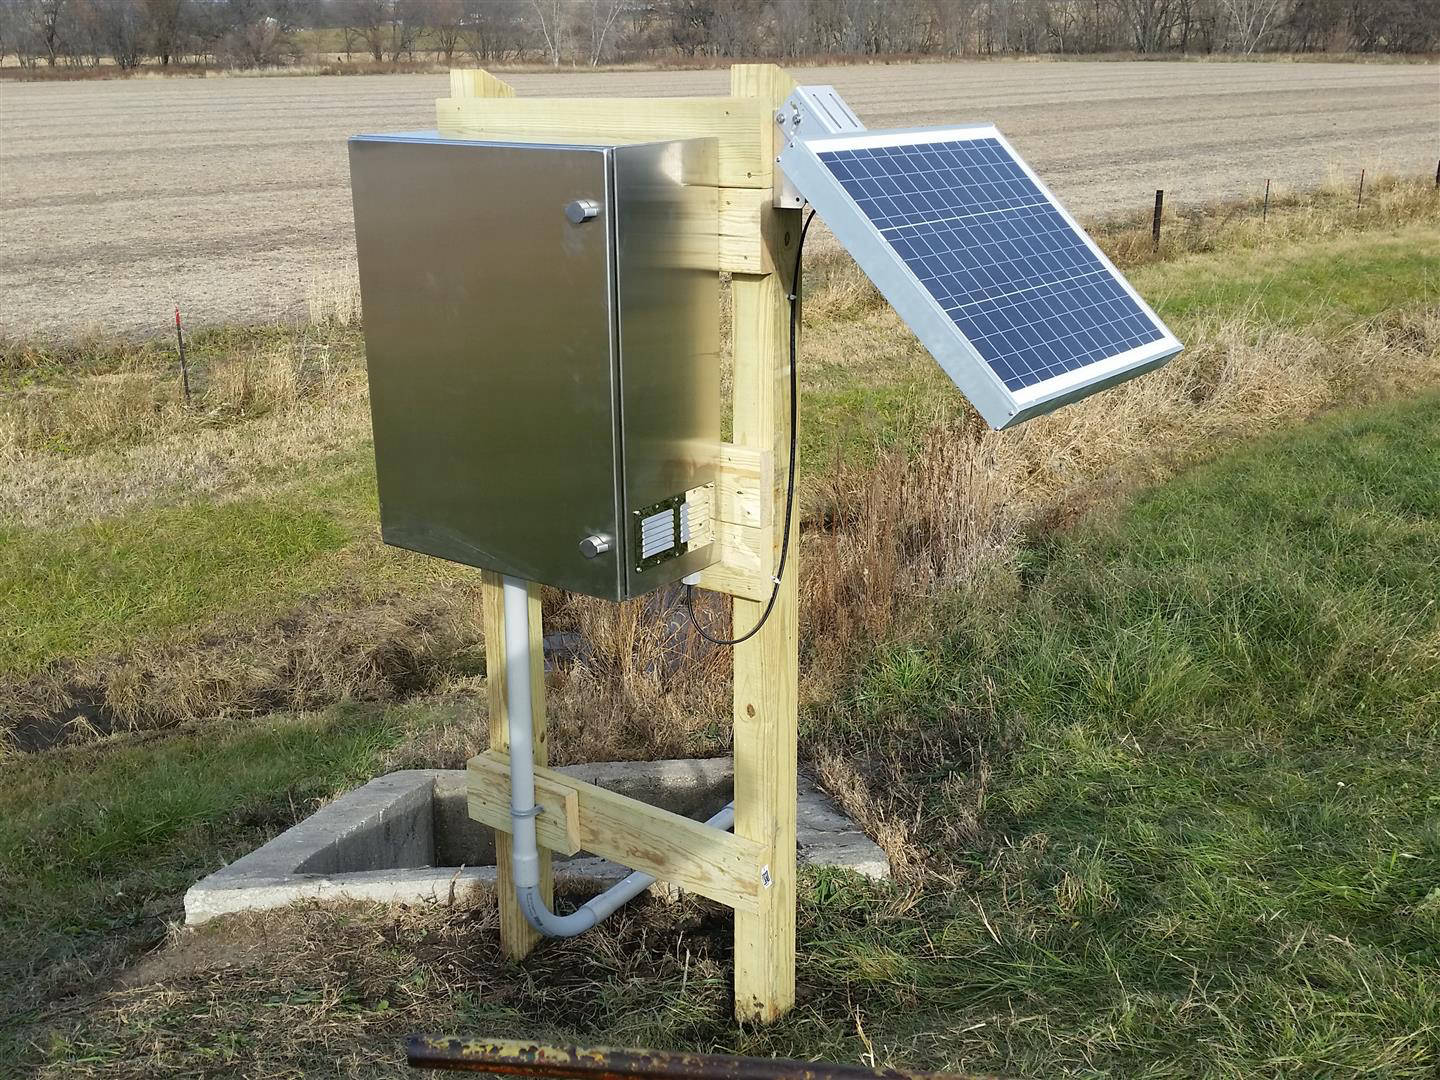 Guthrie Center IA - treated lumber structure, stainless enclosure, solar panel, and Teledyne ISCO Signature ultrasonic flow meter